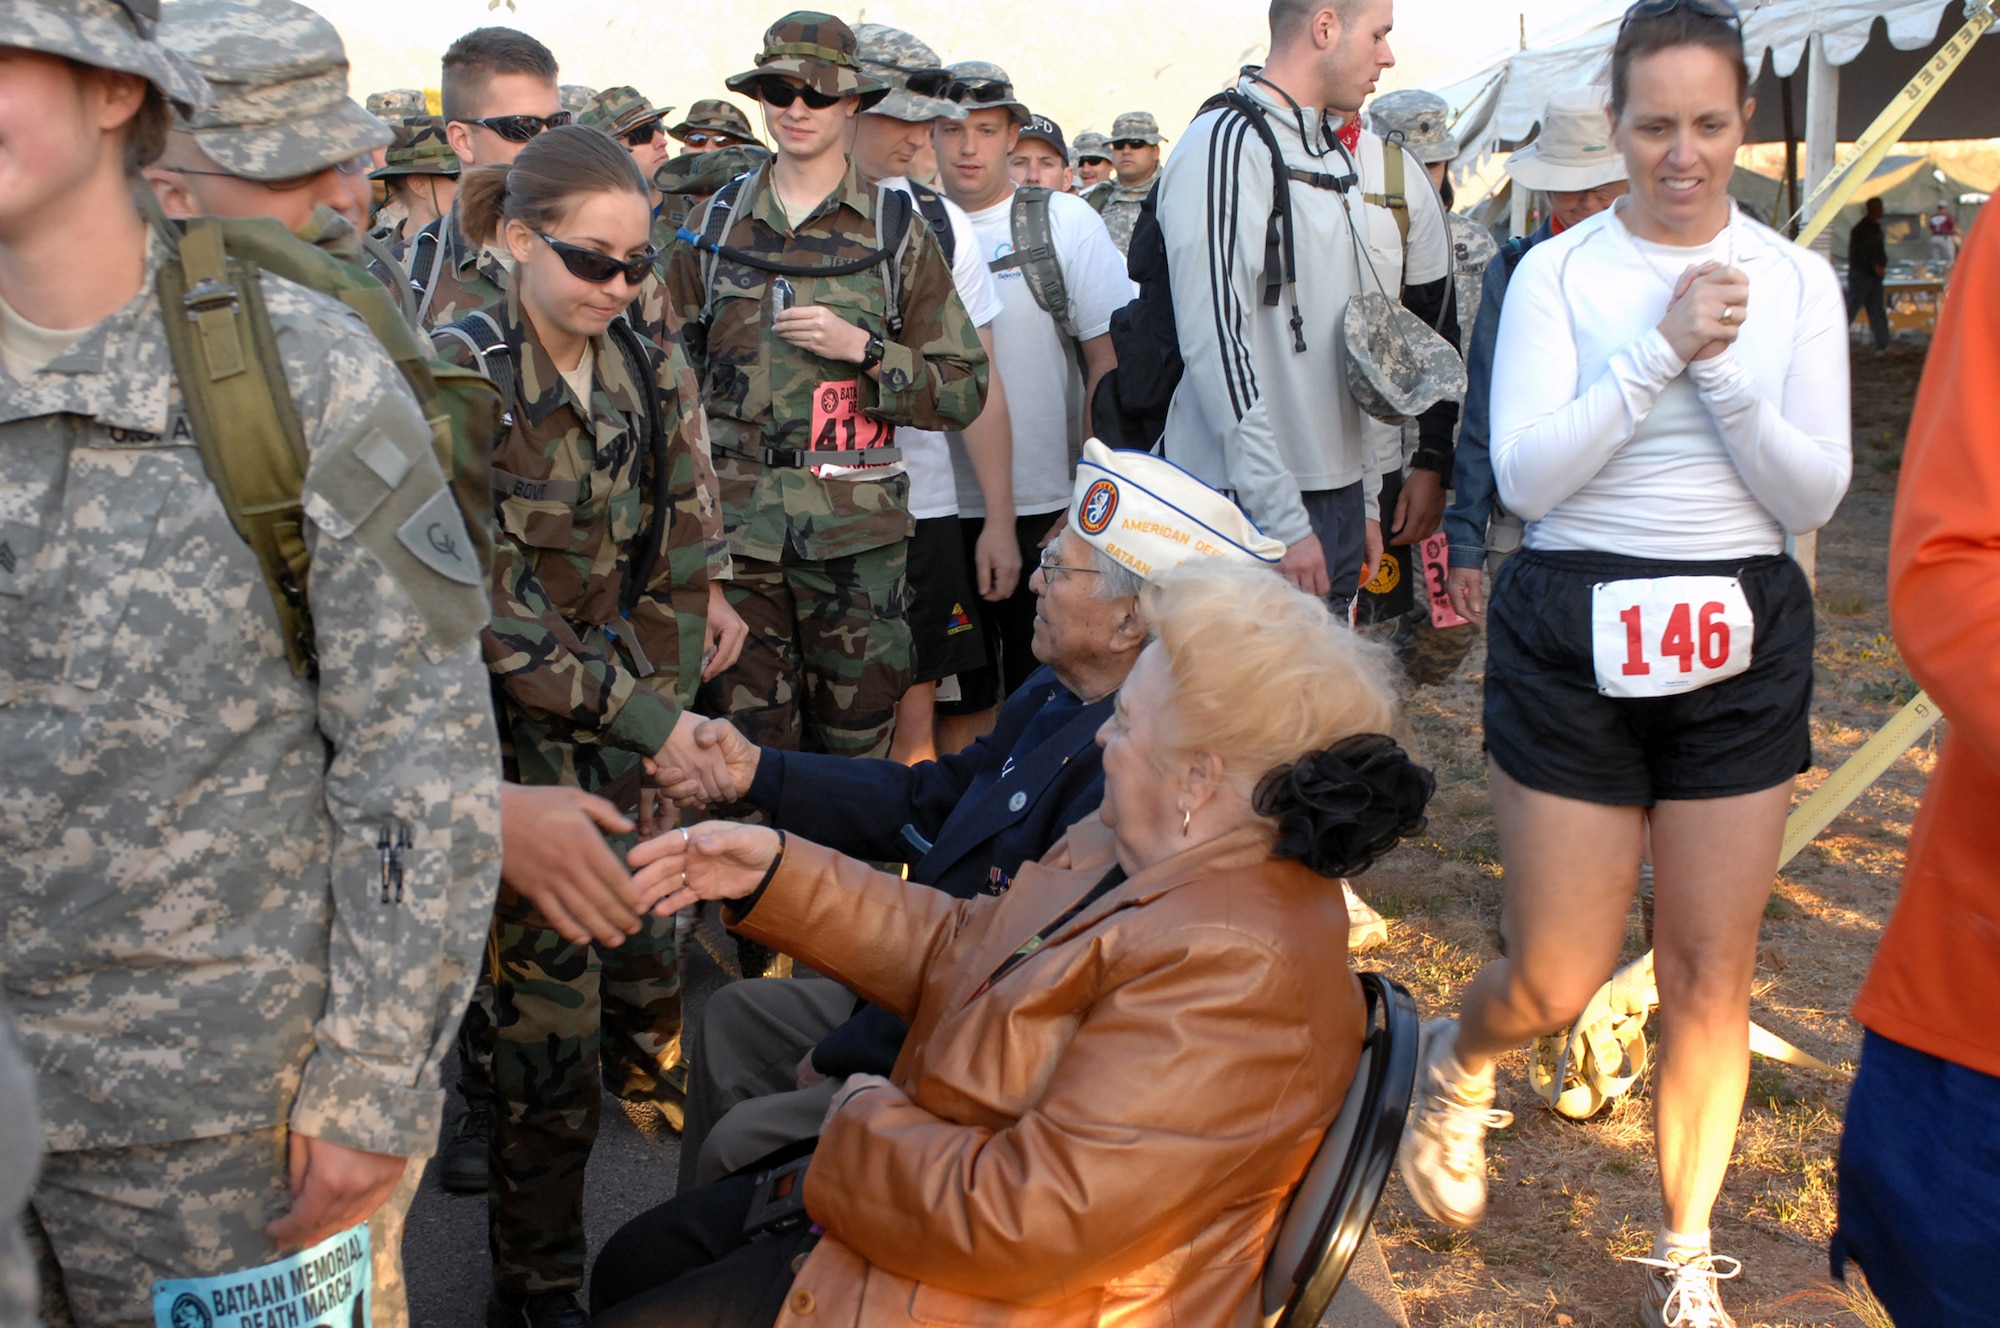 Bataan Death March survivor Carlos Montoya shakes hands with some of the more than 4,400 participants in the 19th Annual Bataan Memorial Death March March 30 at White Sands Missile Range, N.M. Military units from all 50 states as well as more than a dozen foreign countries gathered to honor the men who endured the death march in 1942 and prisoner of war hardships until 1945. (U.S. Air Force photo/Greg Allen) 
